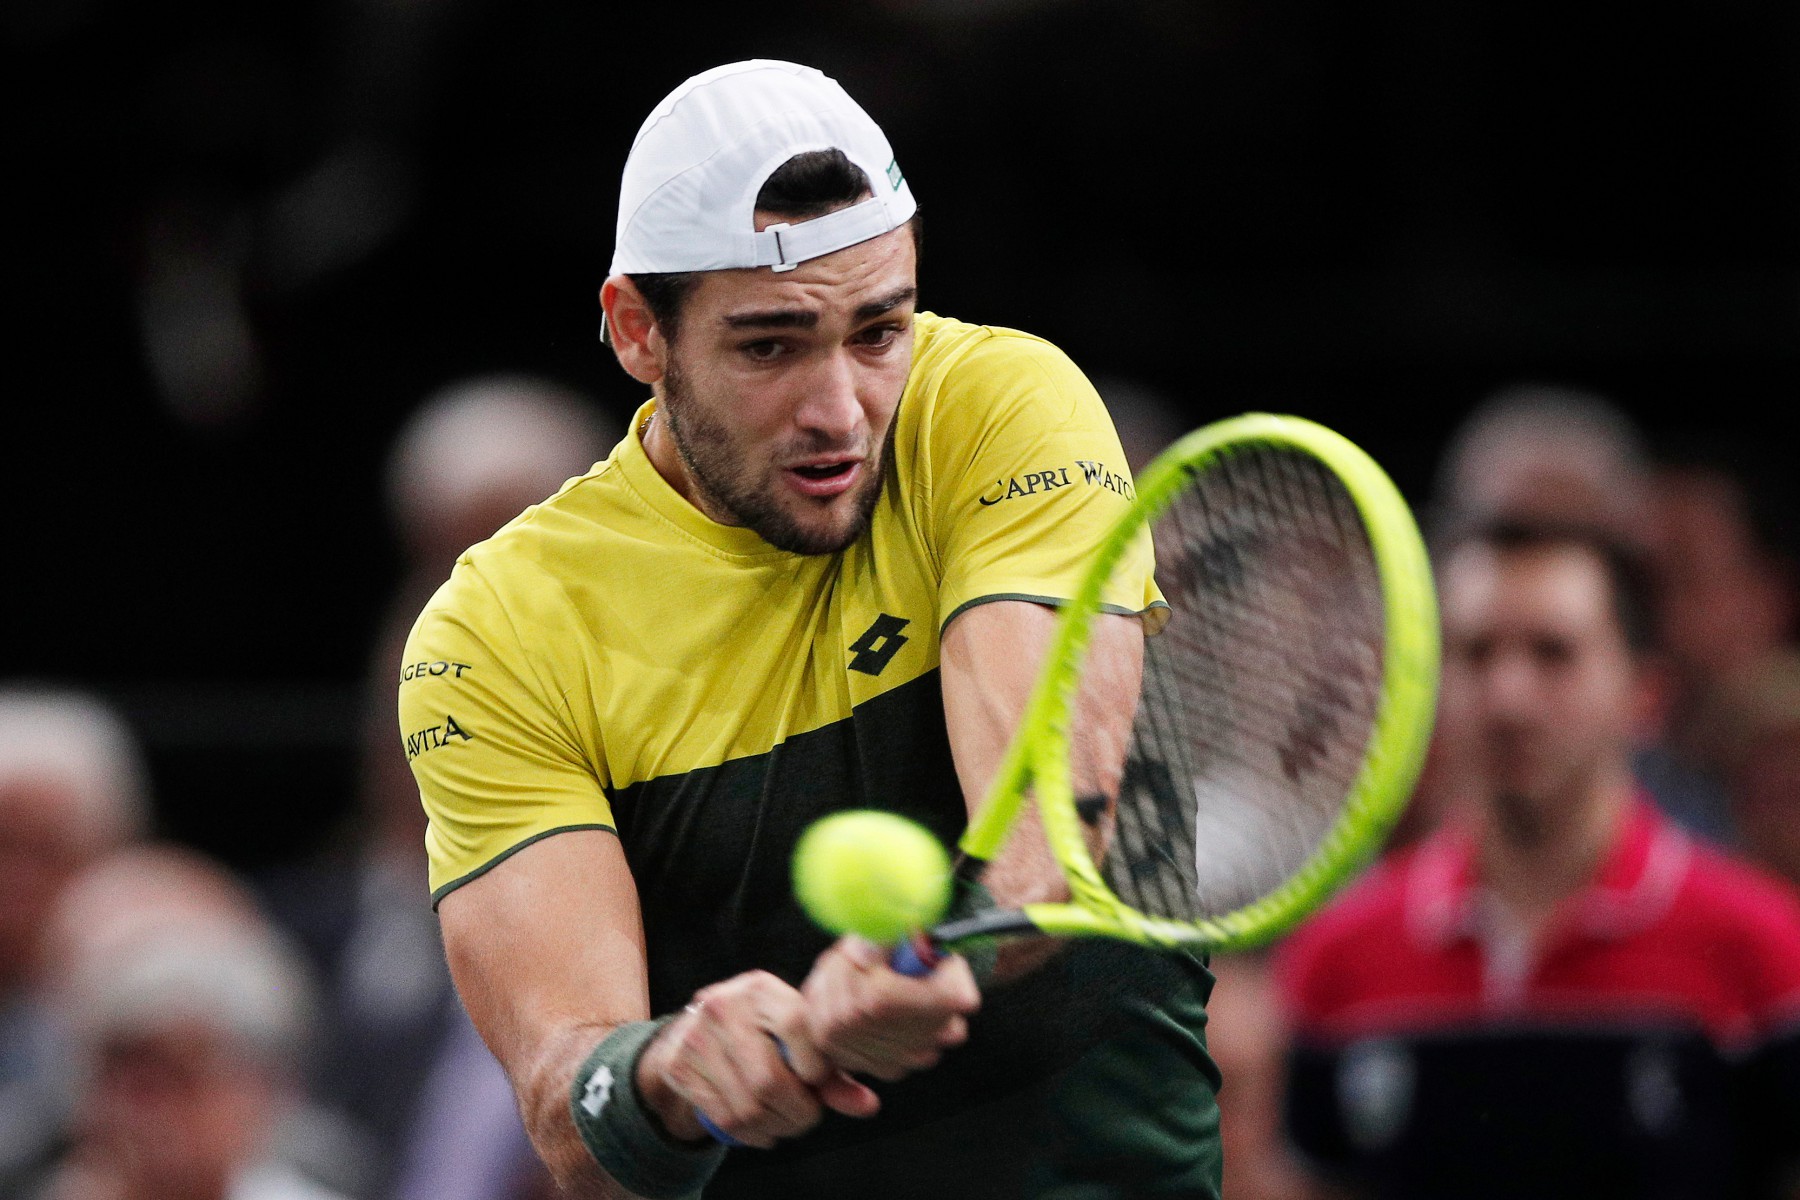 , Is Matteo Berrettini dating Ajla Tomljanovic, is she also a tennis star and was she with Nick Kyrgios?